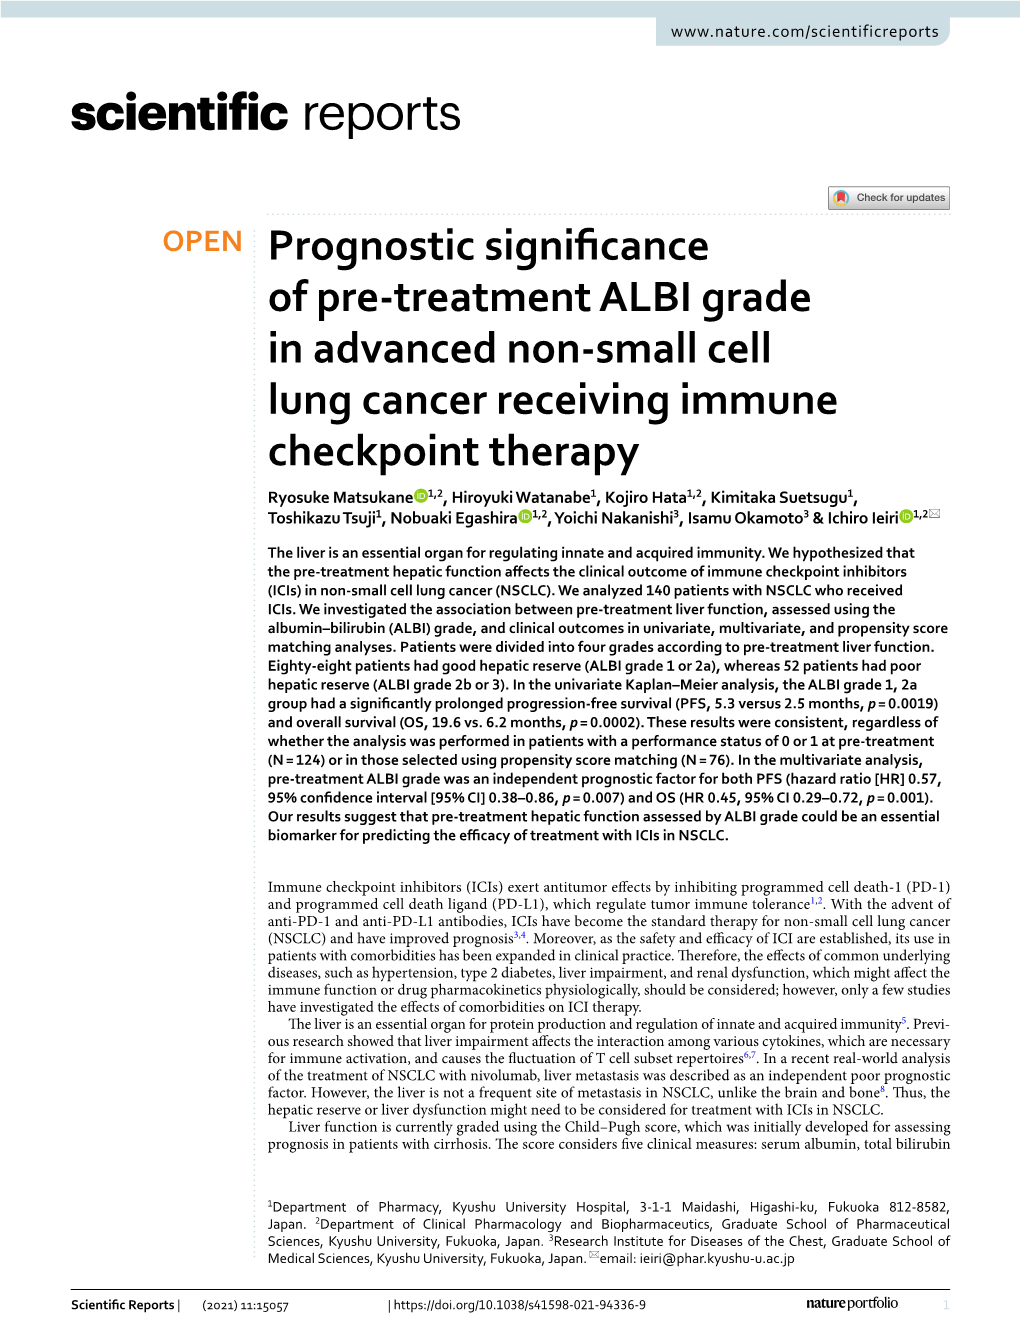 Prognostic Significance of Pre-Treatment ALBI Grade in Advanced Non-Small Cell Lung Cancer Receiving Immune Checkpoint Therapy